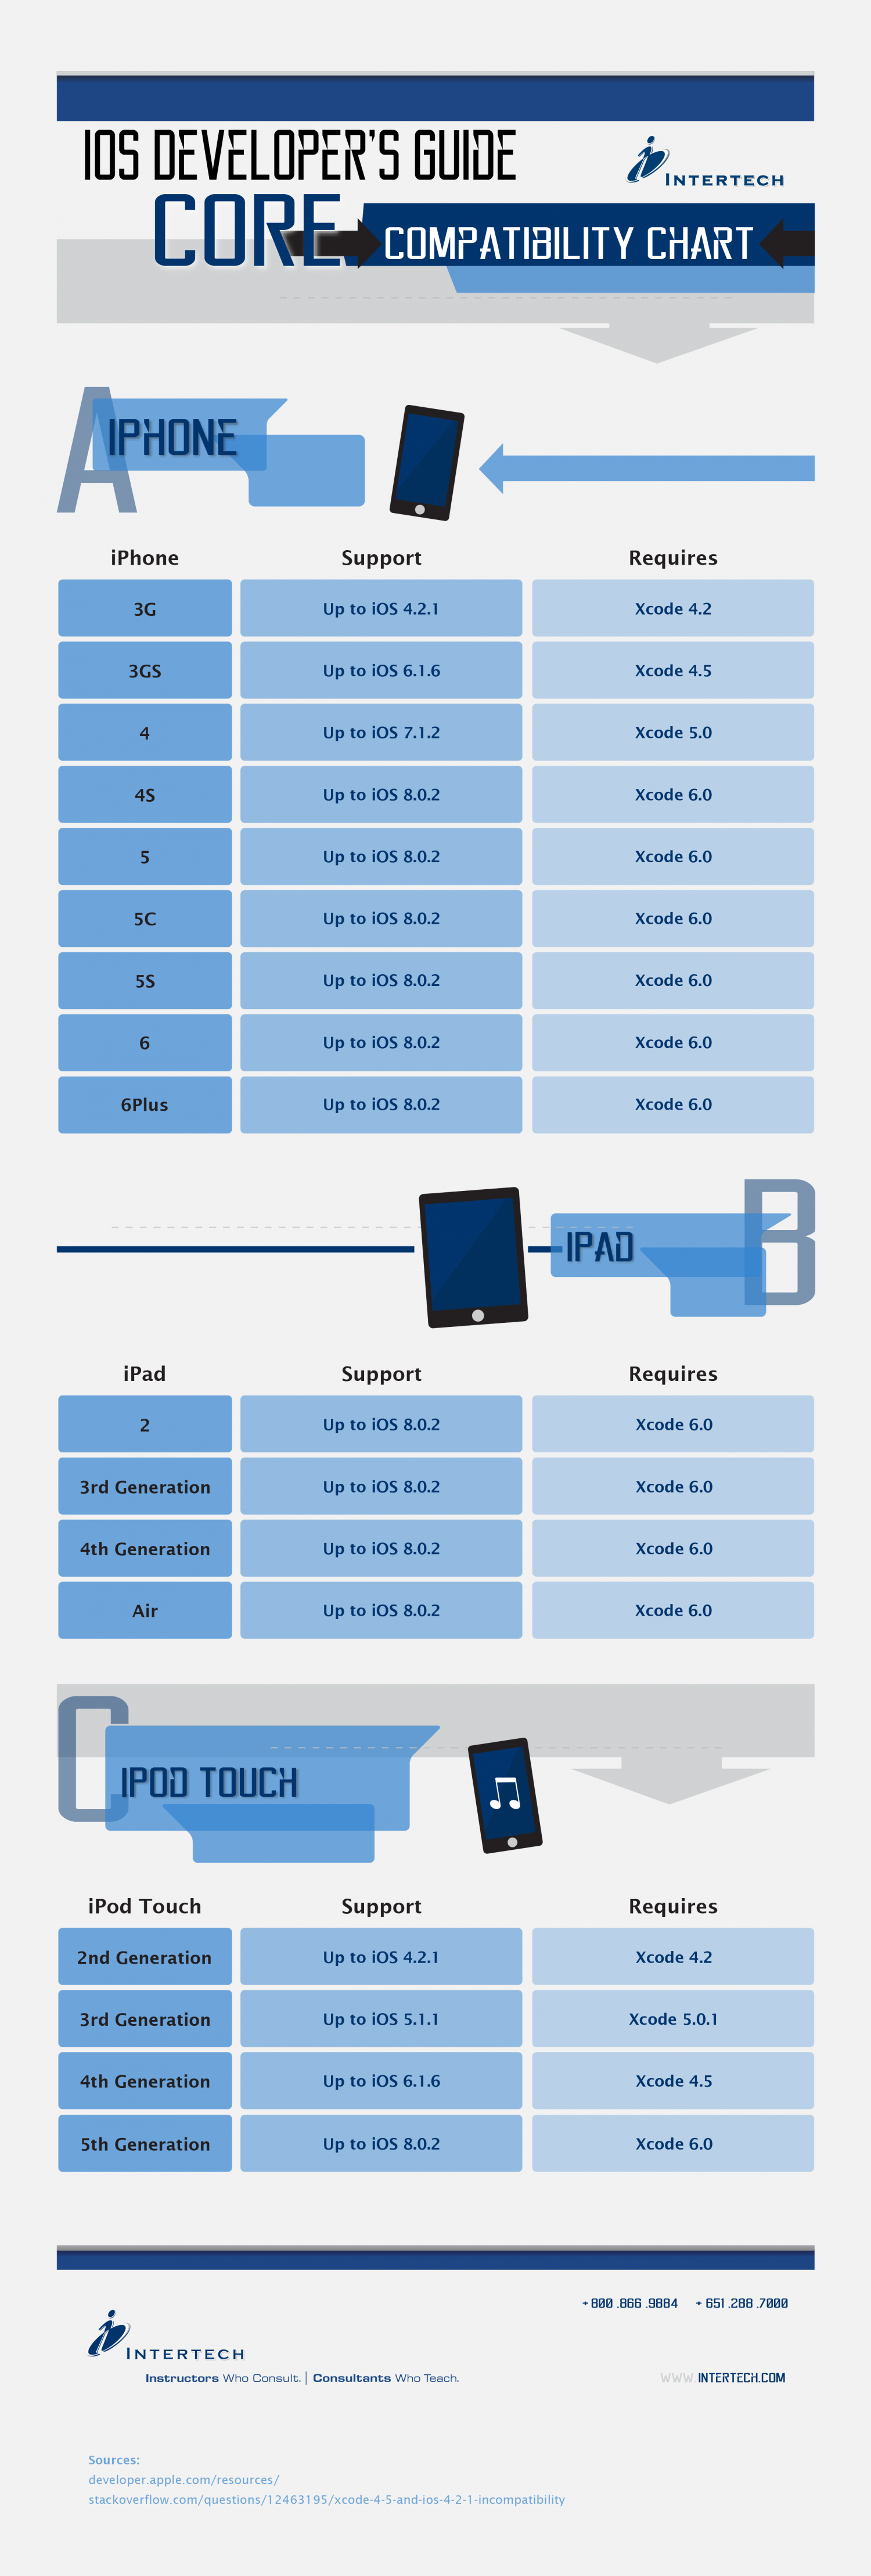 iOS Developers Guide Infographic